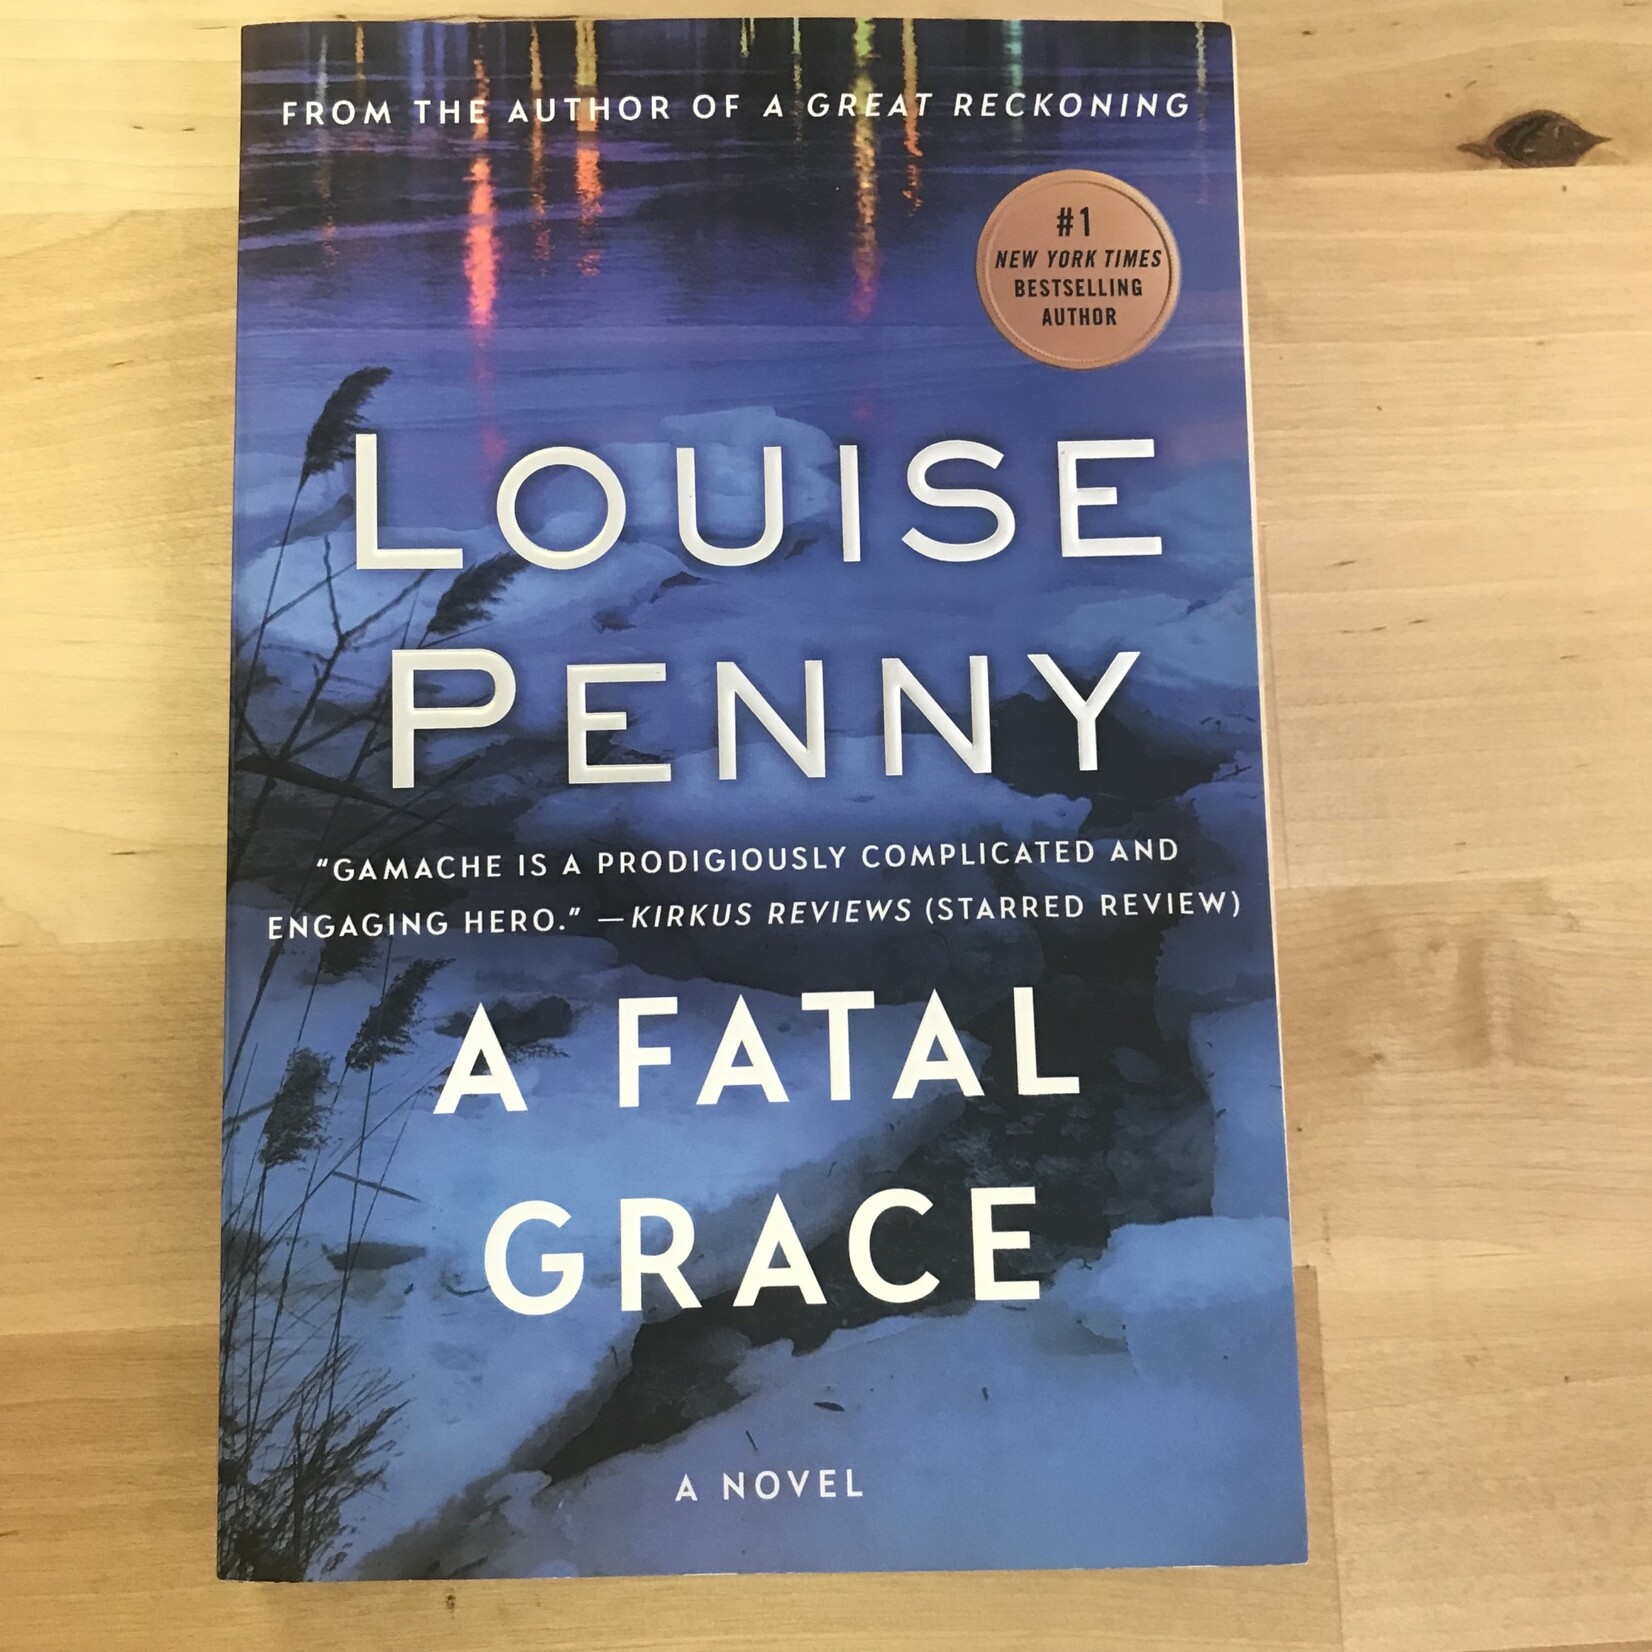 Louise Penny - A Fatal Grace - Paperback (USED)